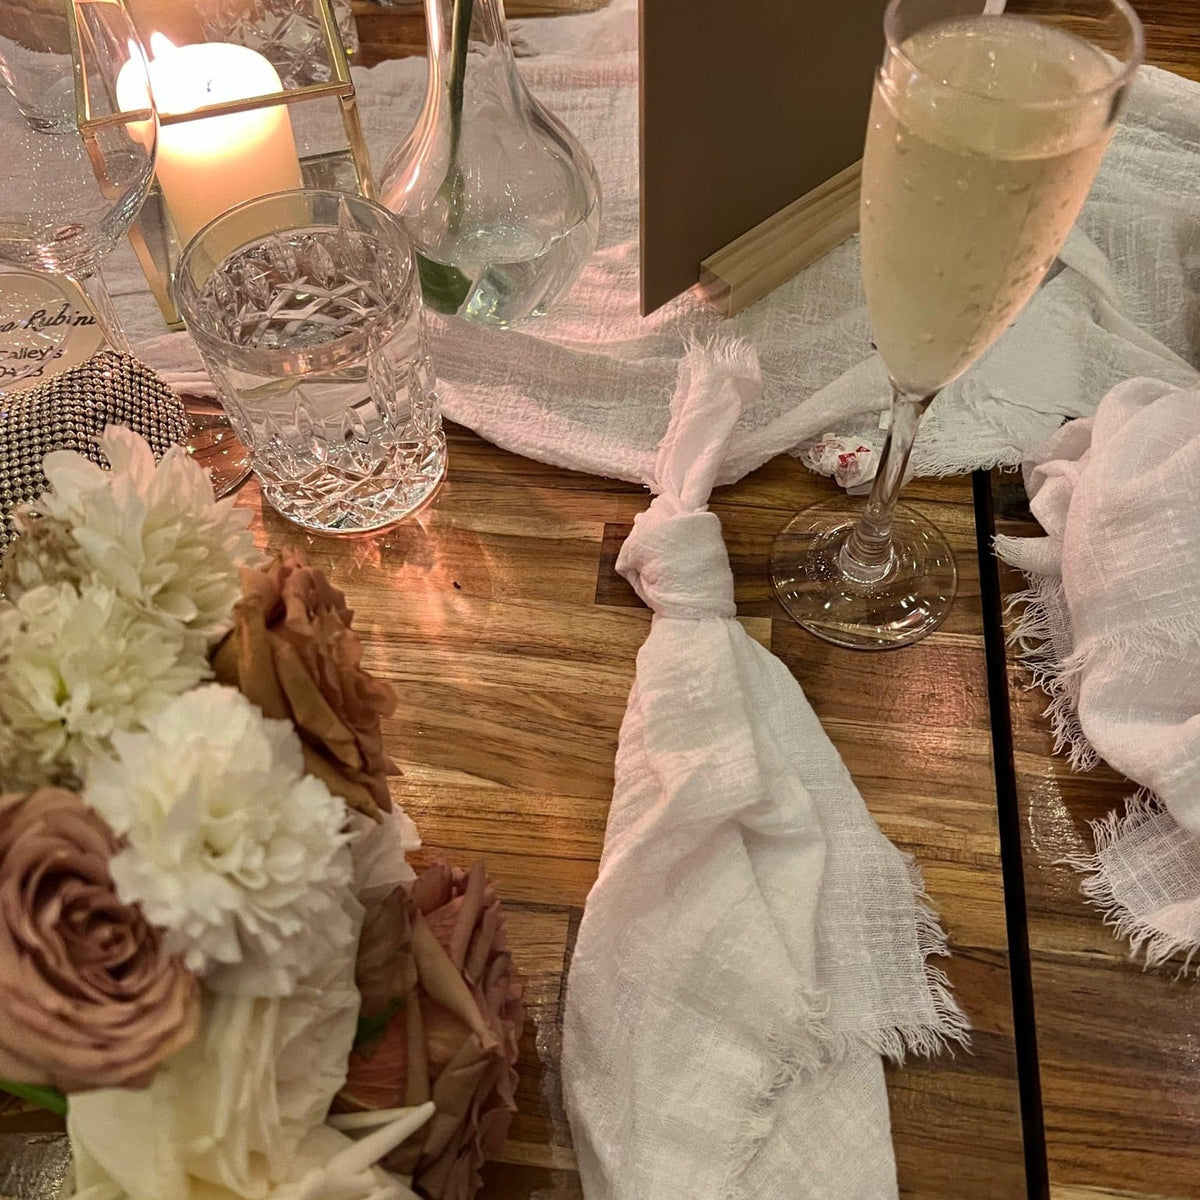 Pure White Rustic Cotton Table Runners - 3m